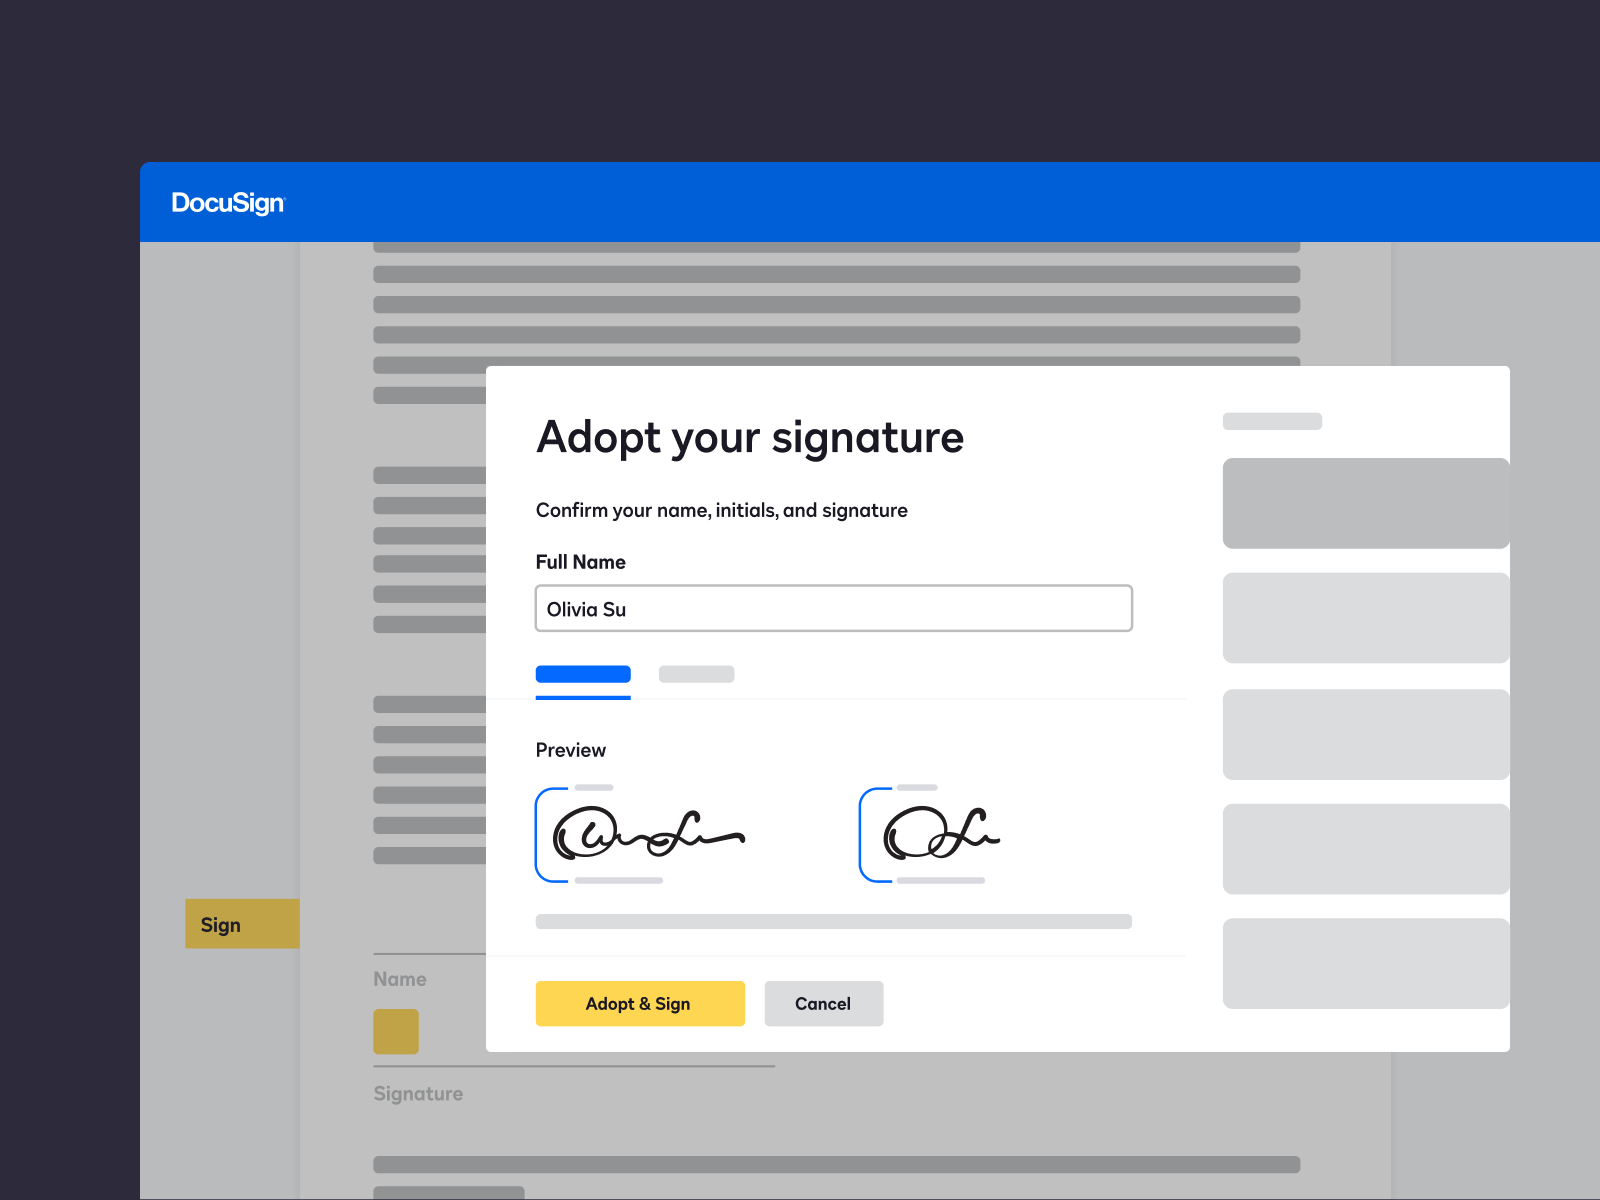 DocuSign Products | DocuSign